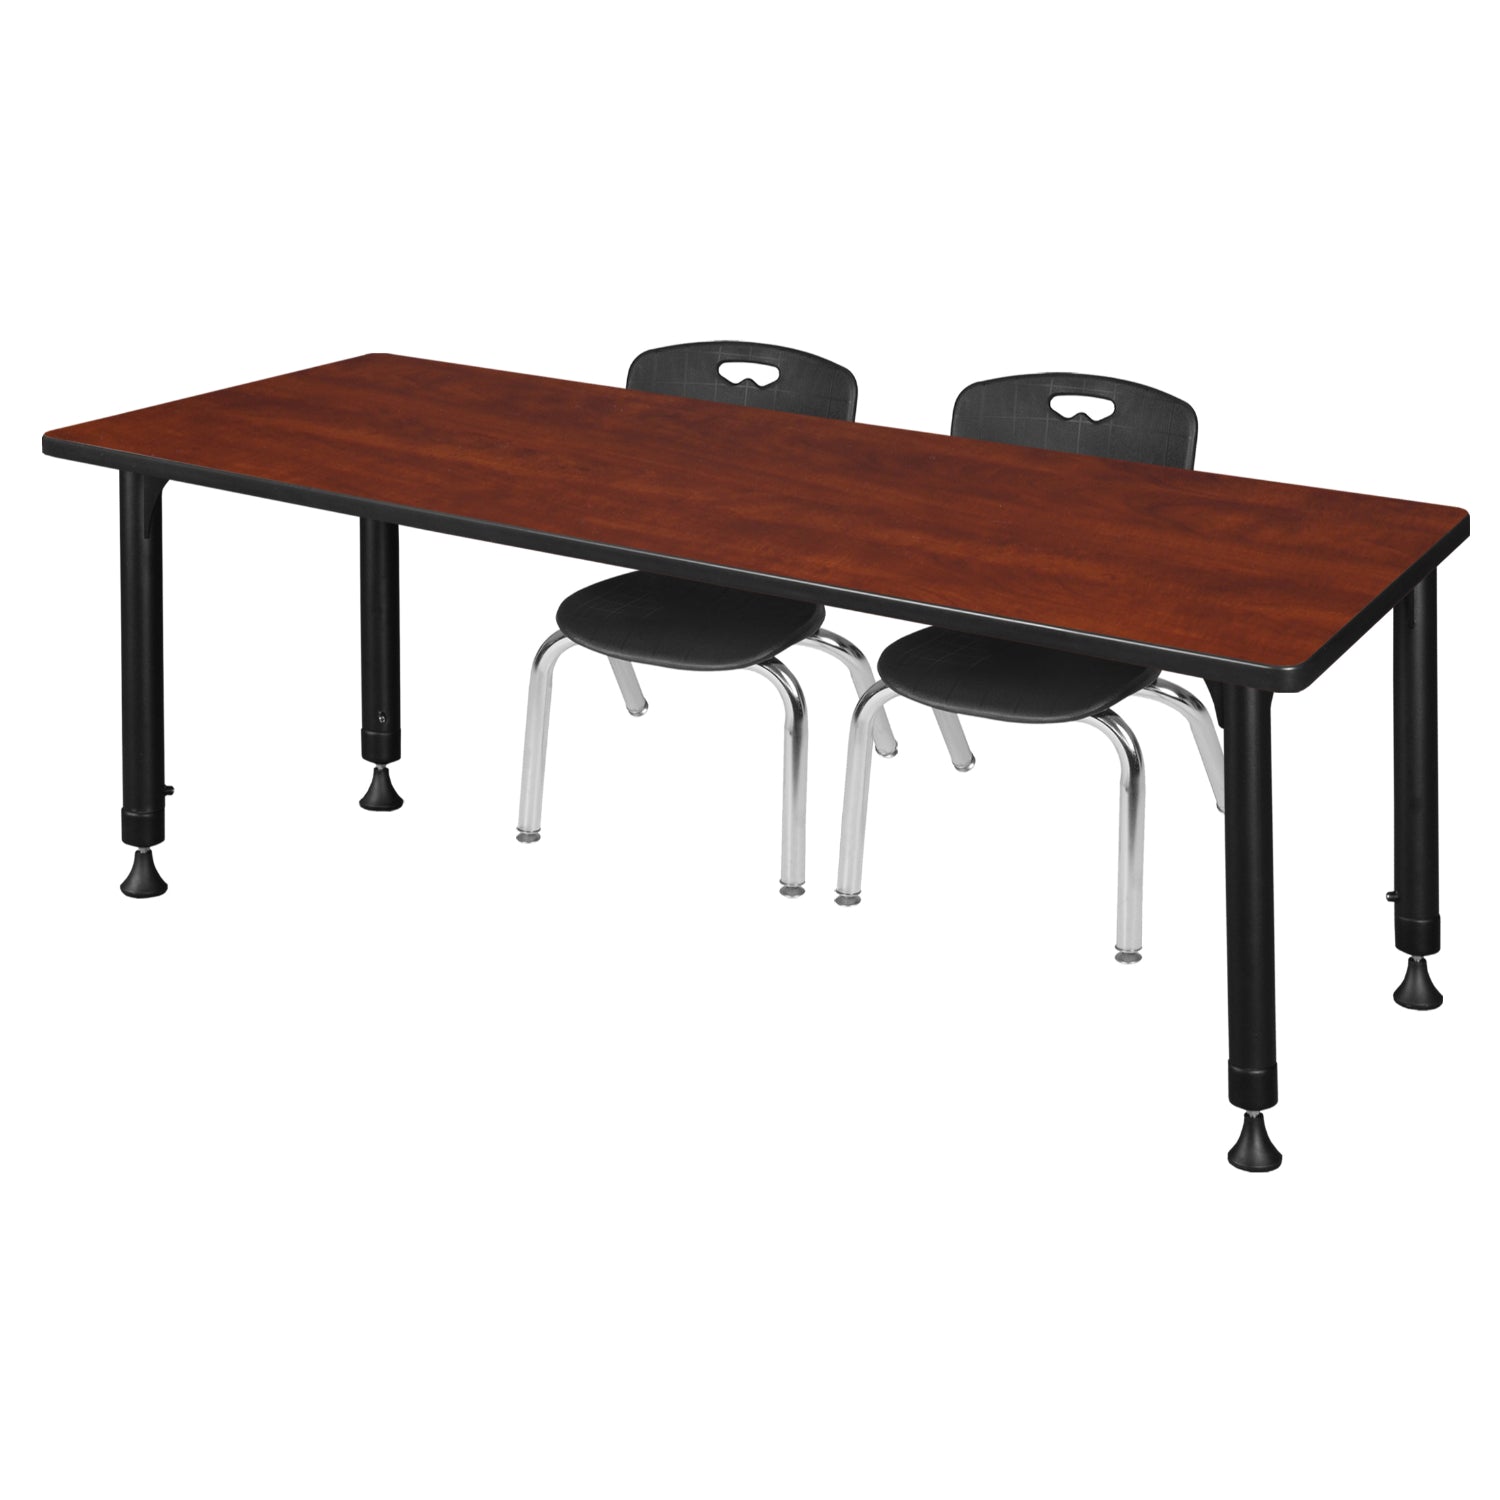 Kee Classroom Table and Chair Package, Kee 60" x 24" Rectangular Adjustable Height Table with 2 Andy 12" Stack Chairs